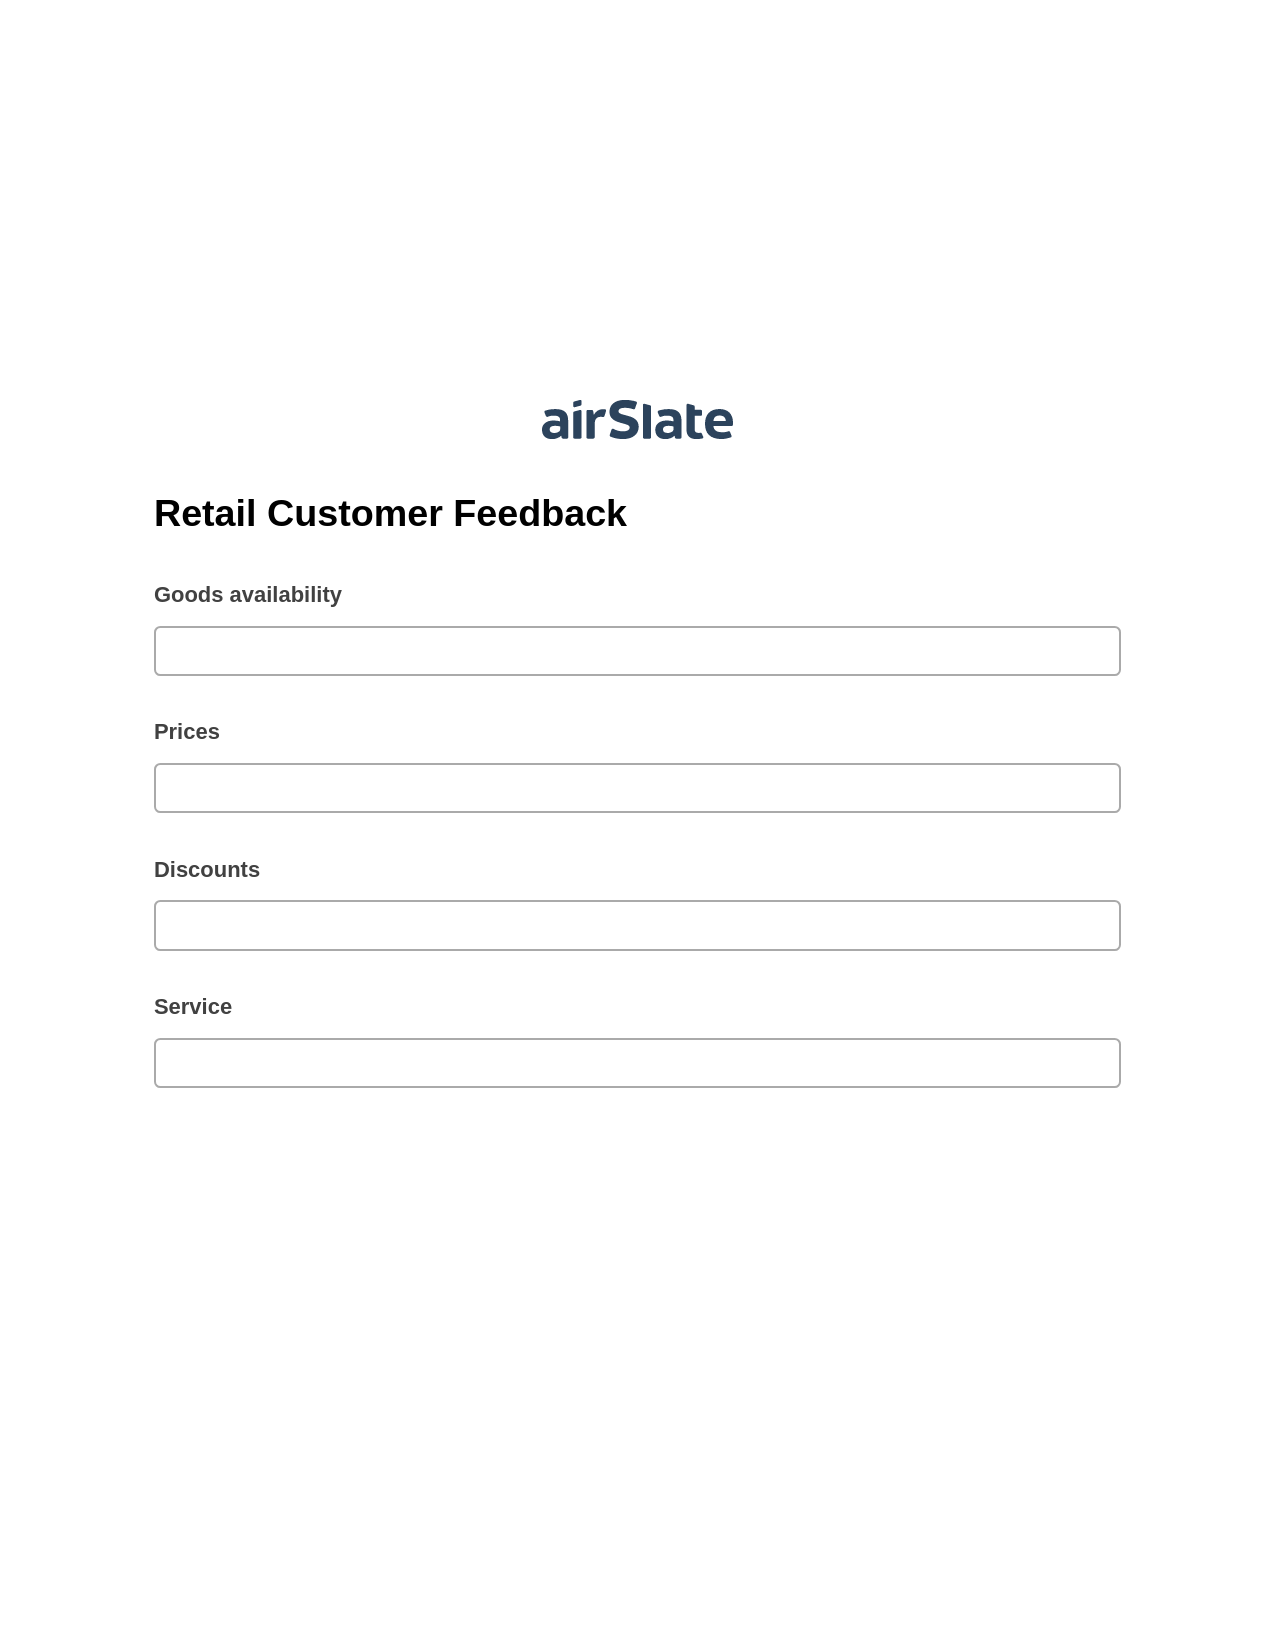 Retail Customer Feedback Pre-fill from NetSuite Records Bot, Unassign Role Bot, Post-finish Document Bot